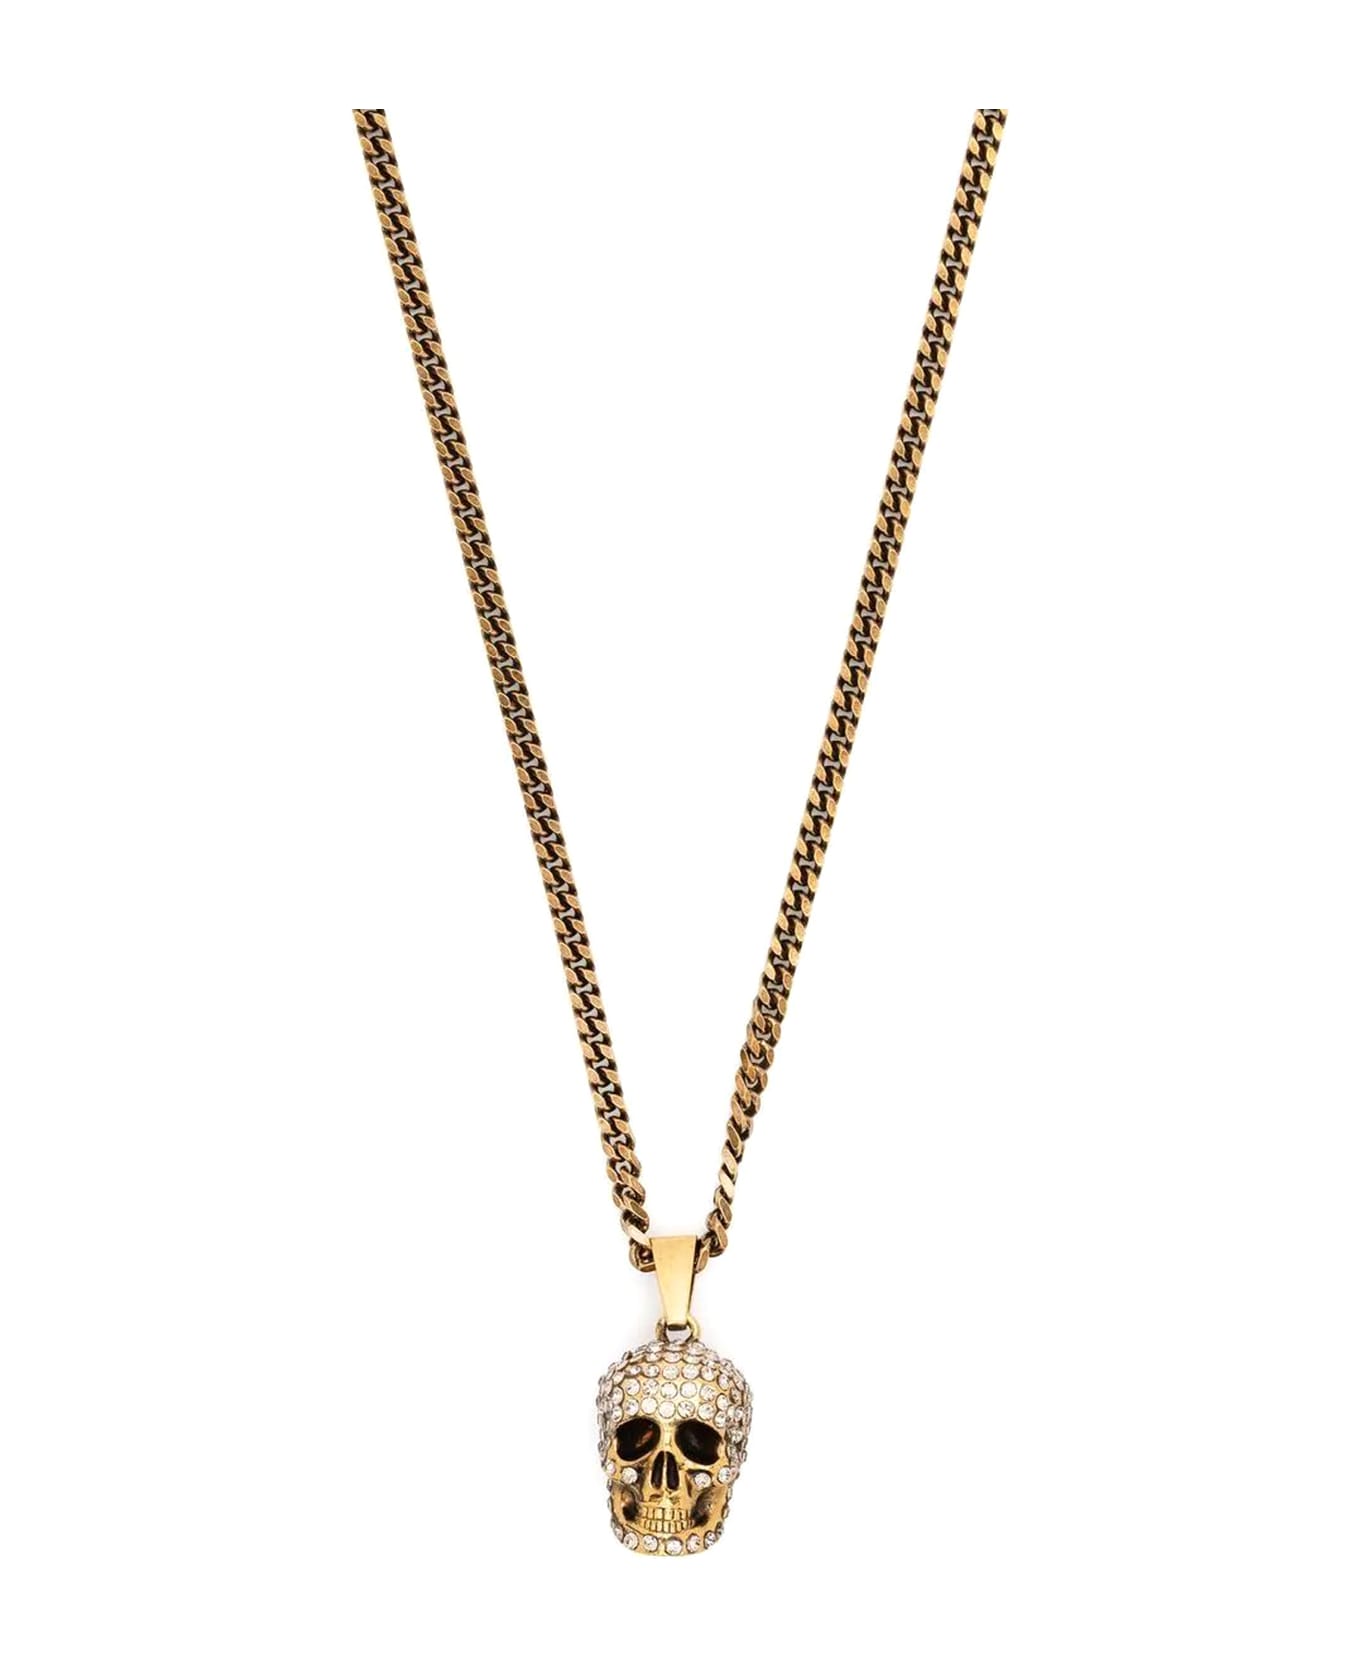 Alexander McQueen Pave Long Necklace - Greige ネックレス